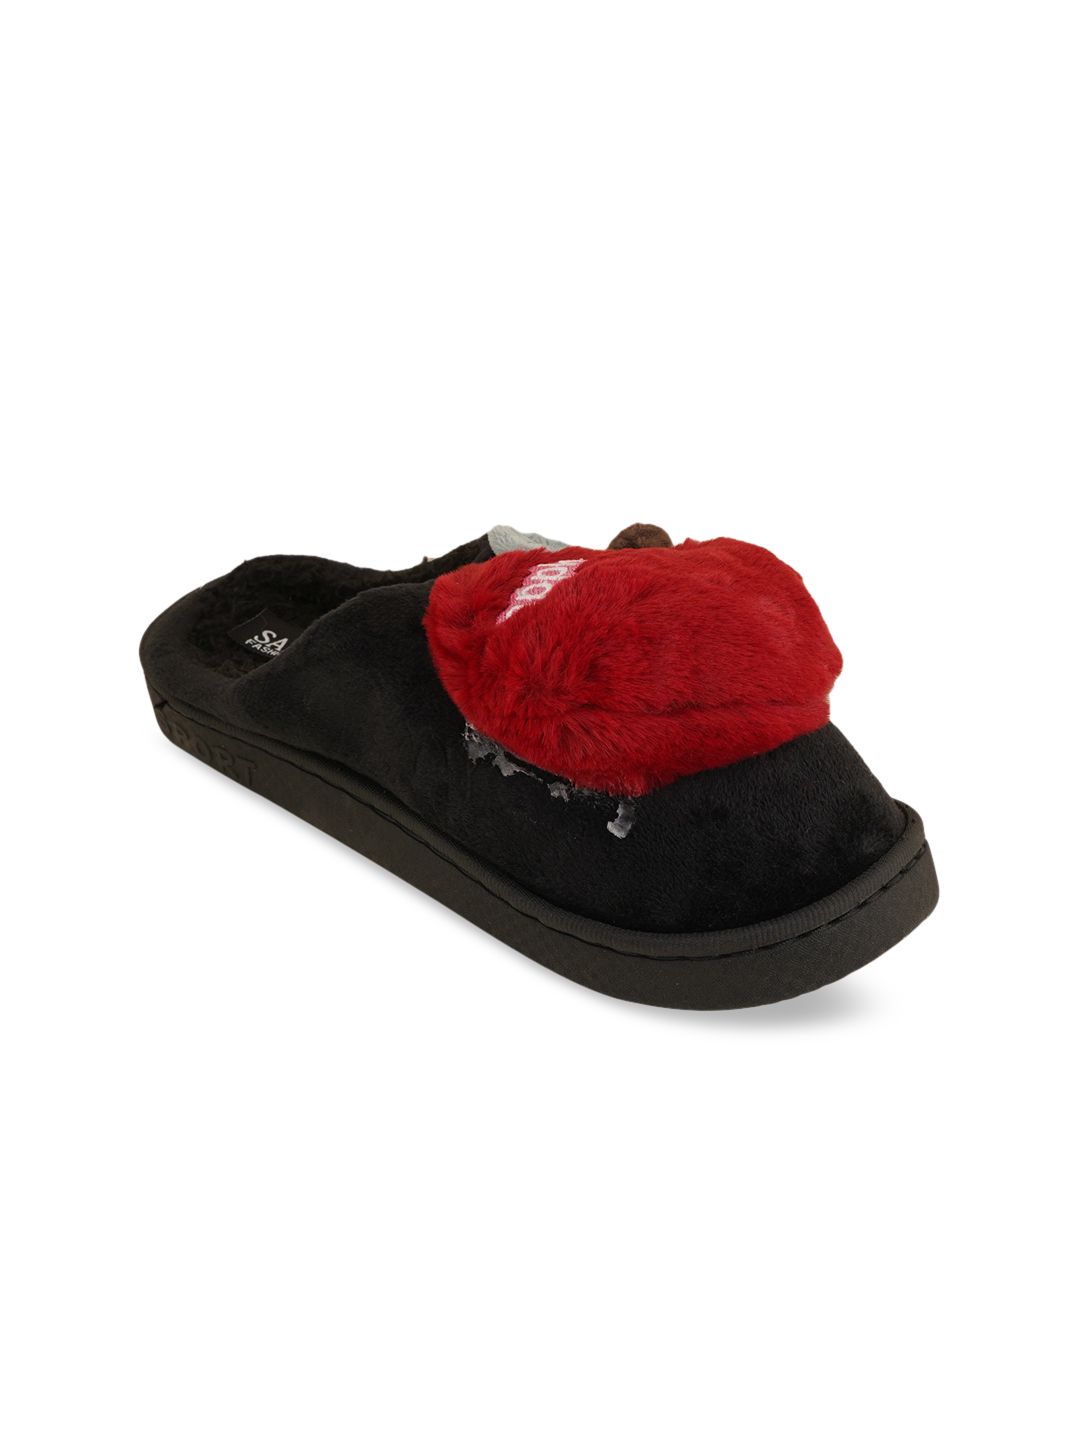 SAPATOS Women Black & Red Room Slippers Price in India